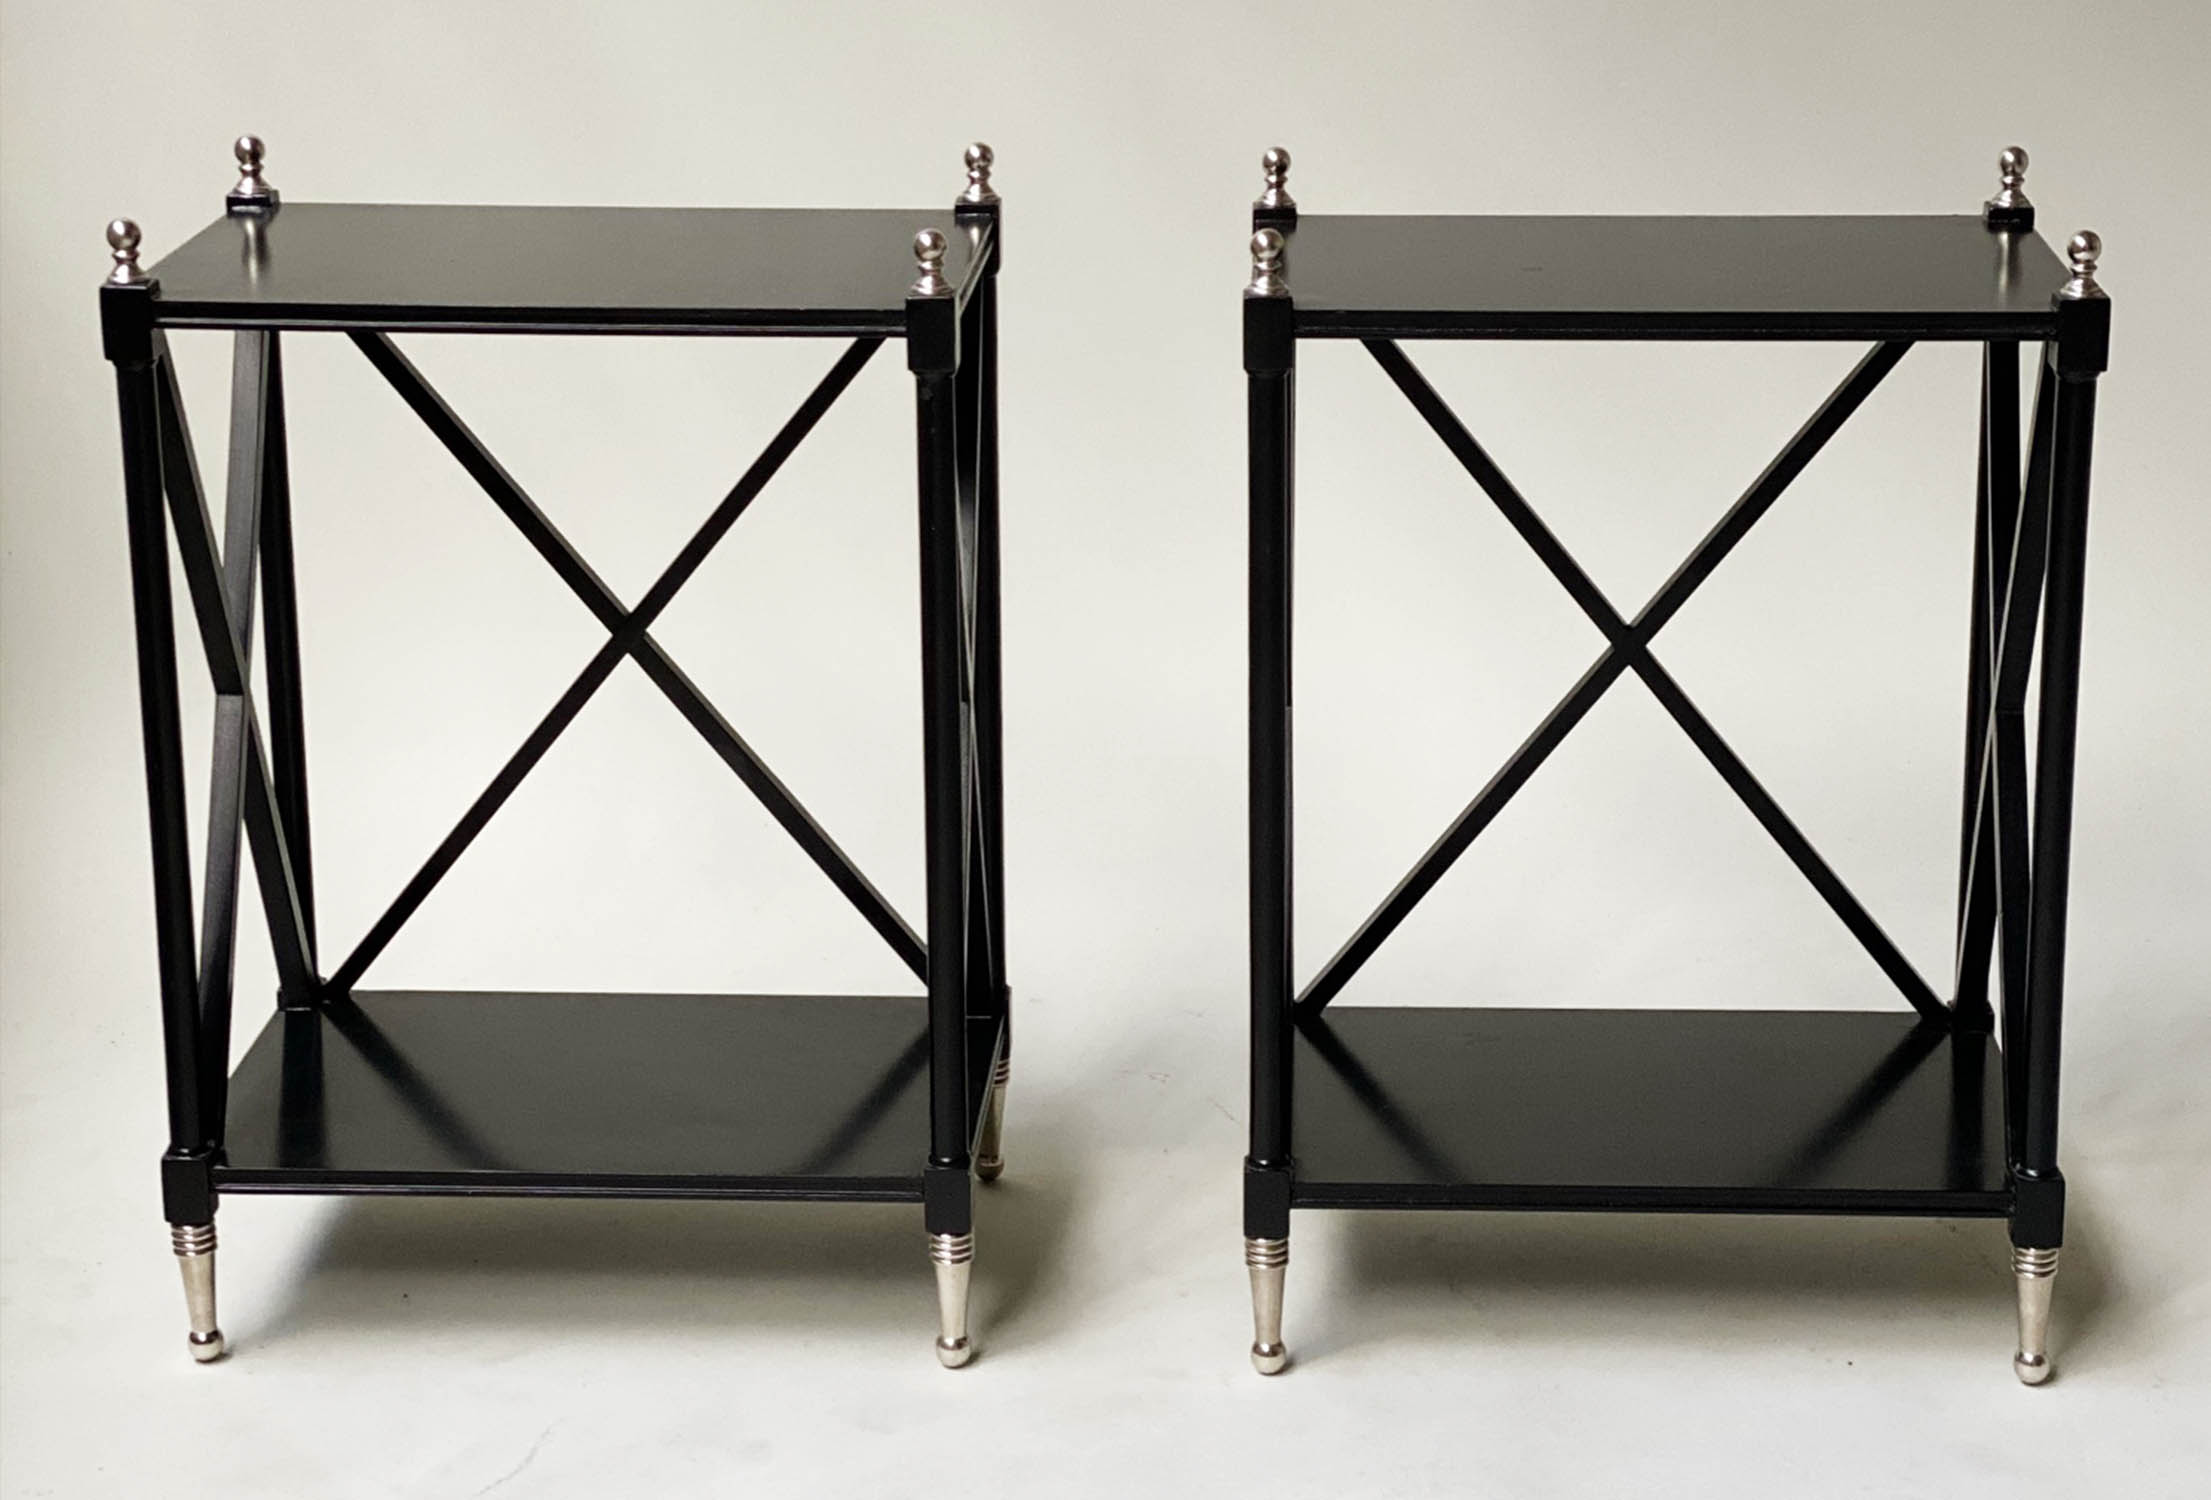 LAMP TABLES, a pair, black lacquered and chrome mounted with X supports, 35cm W. (2)